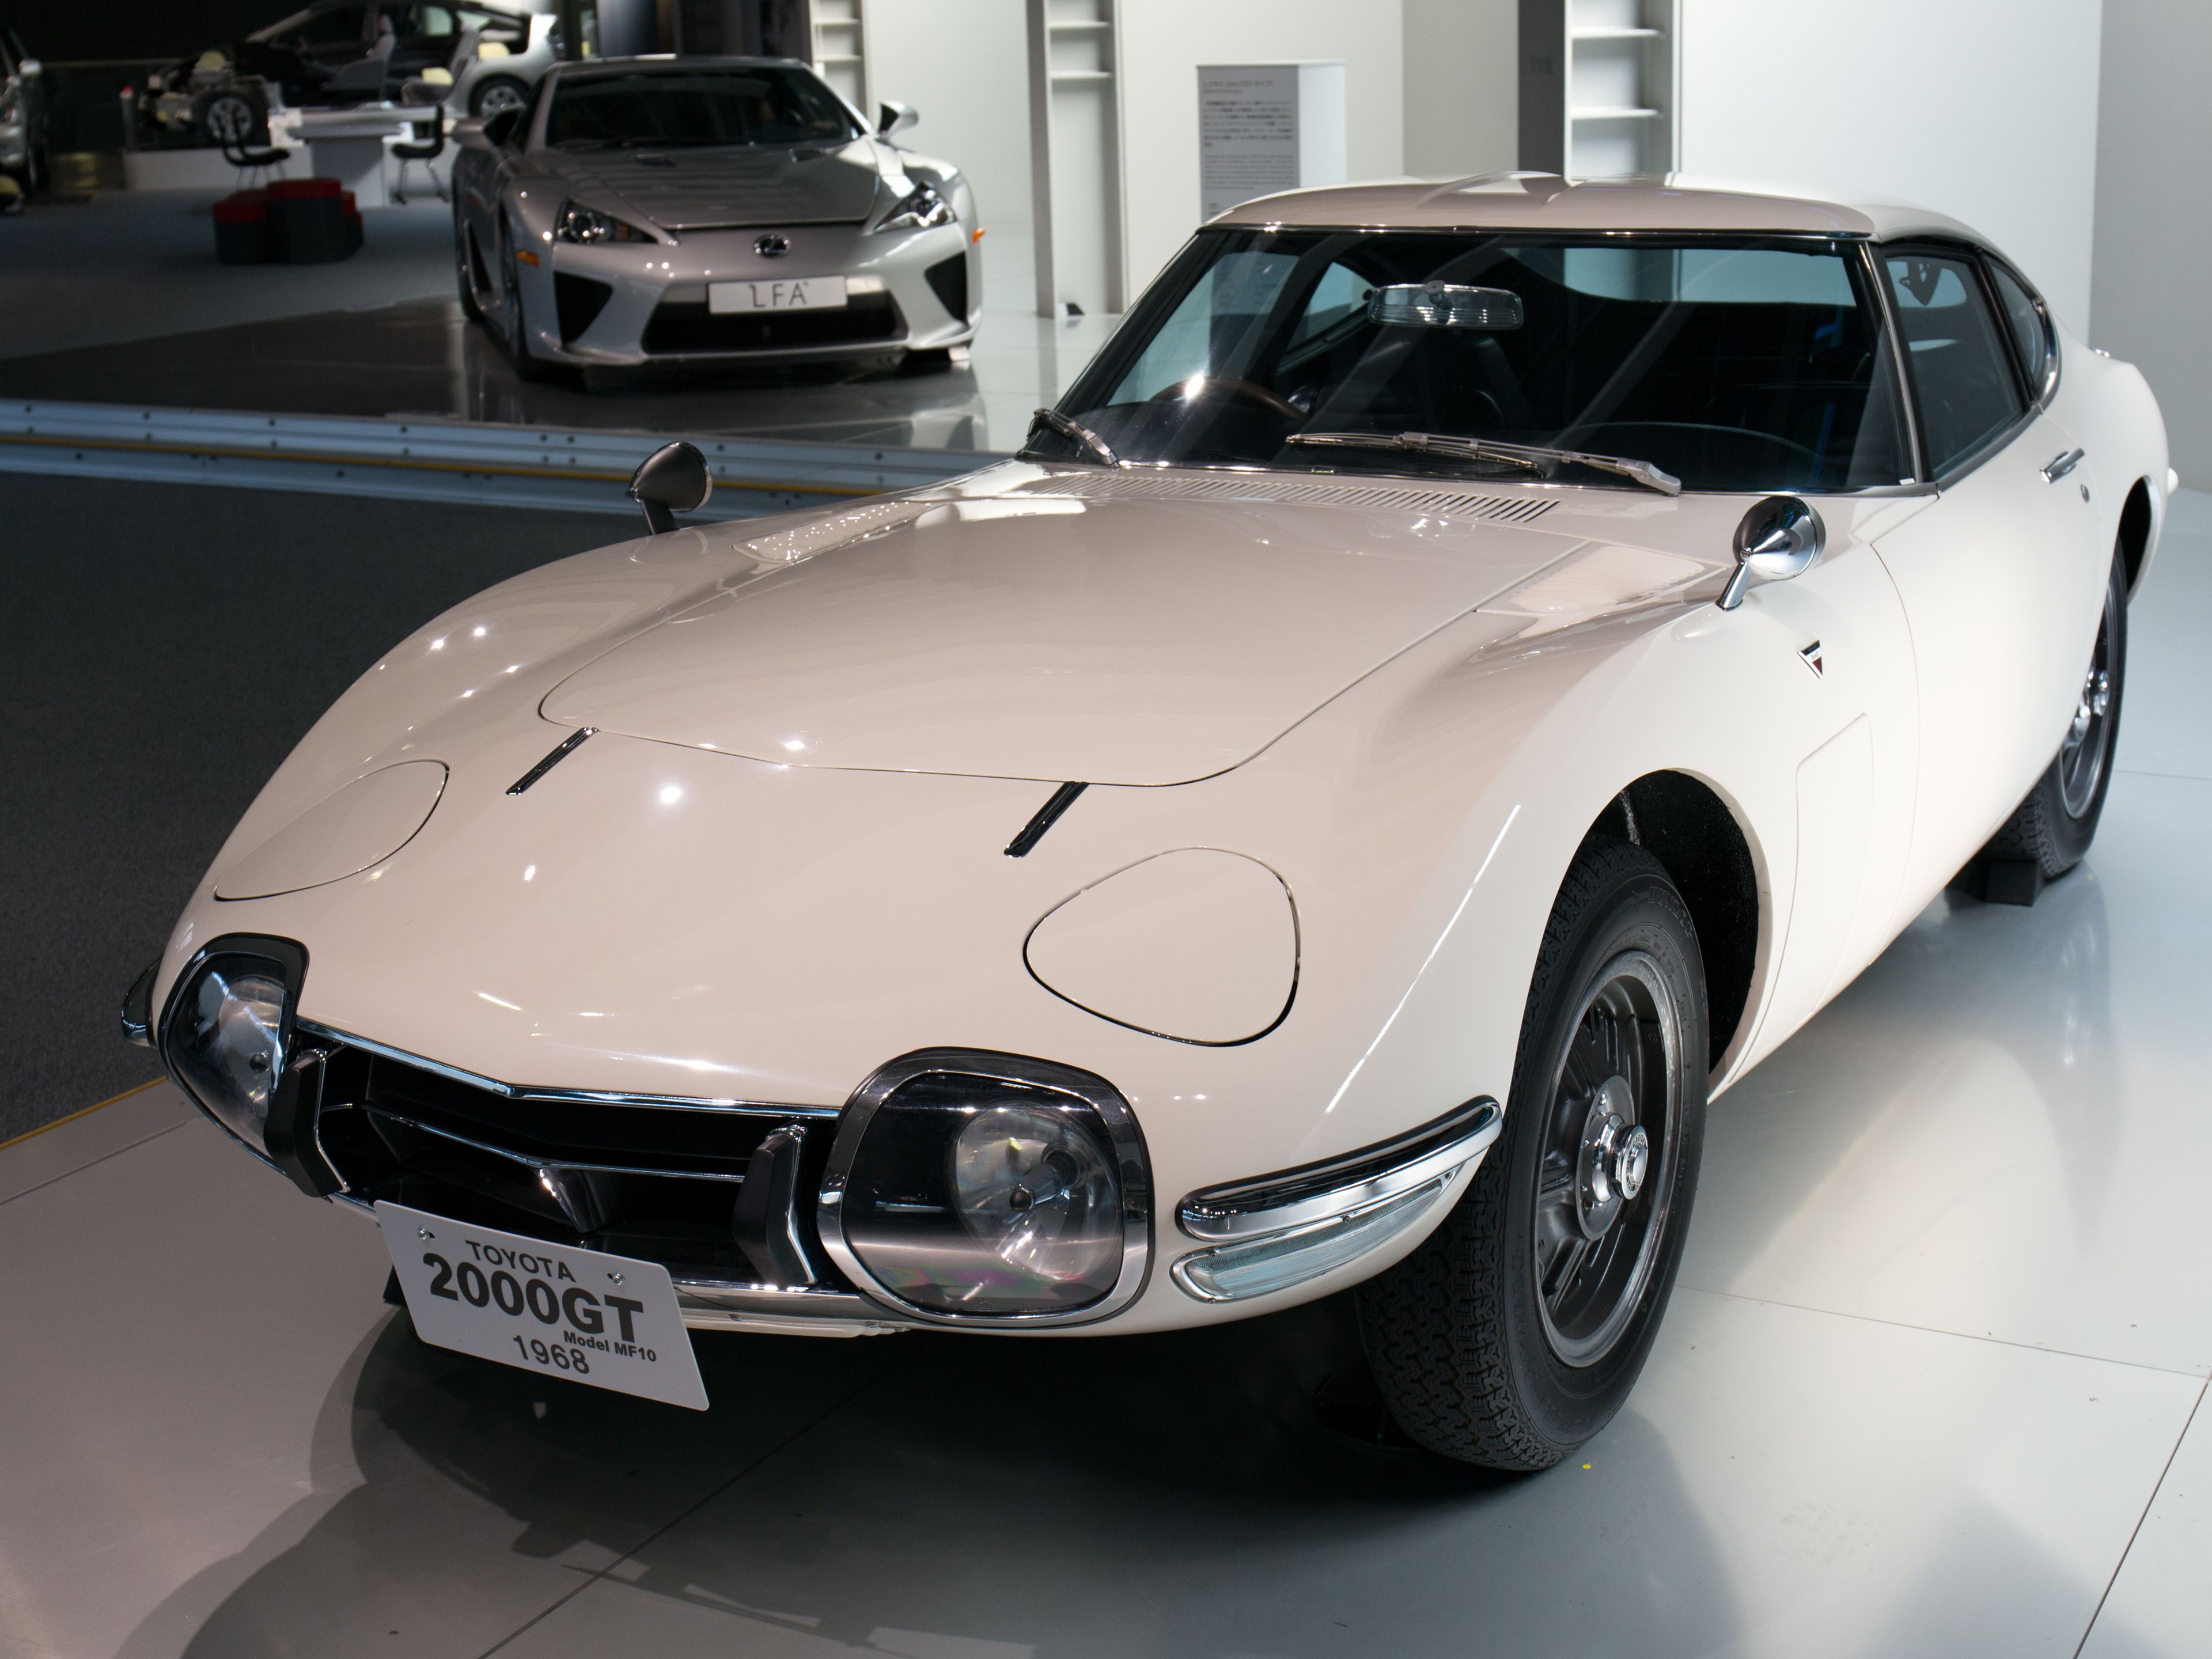 Toyota_2000GT_MF10_(1968)_front-left_Toyota_Automobile_Museum